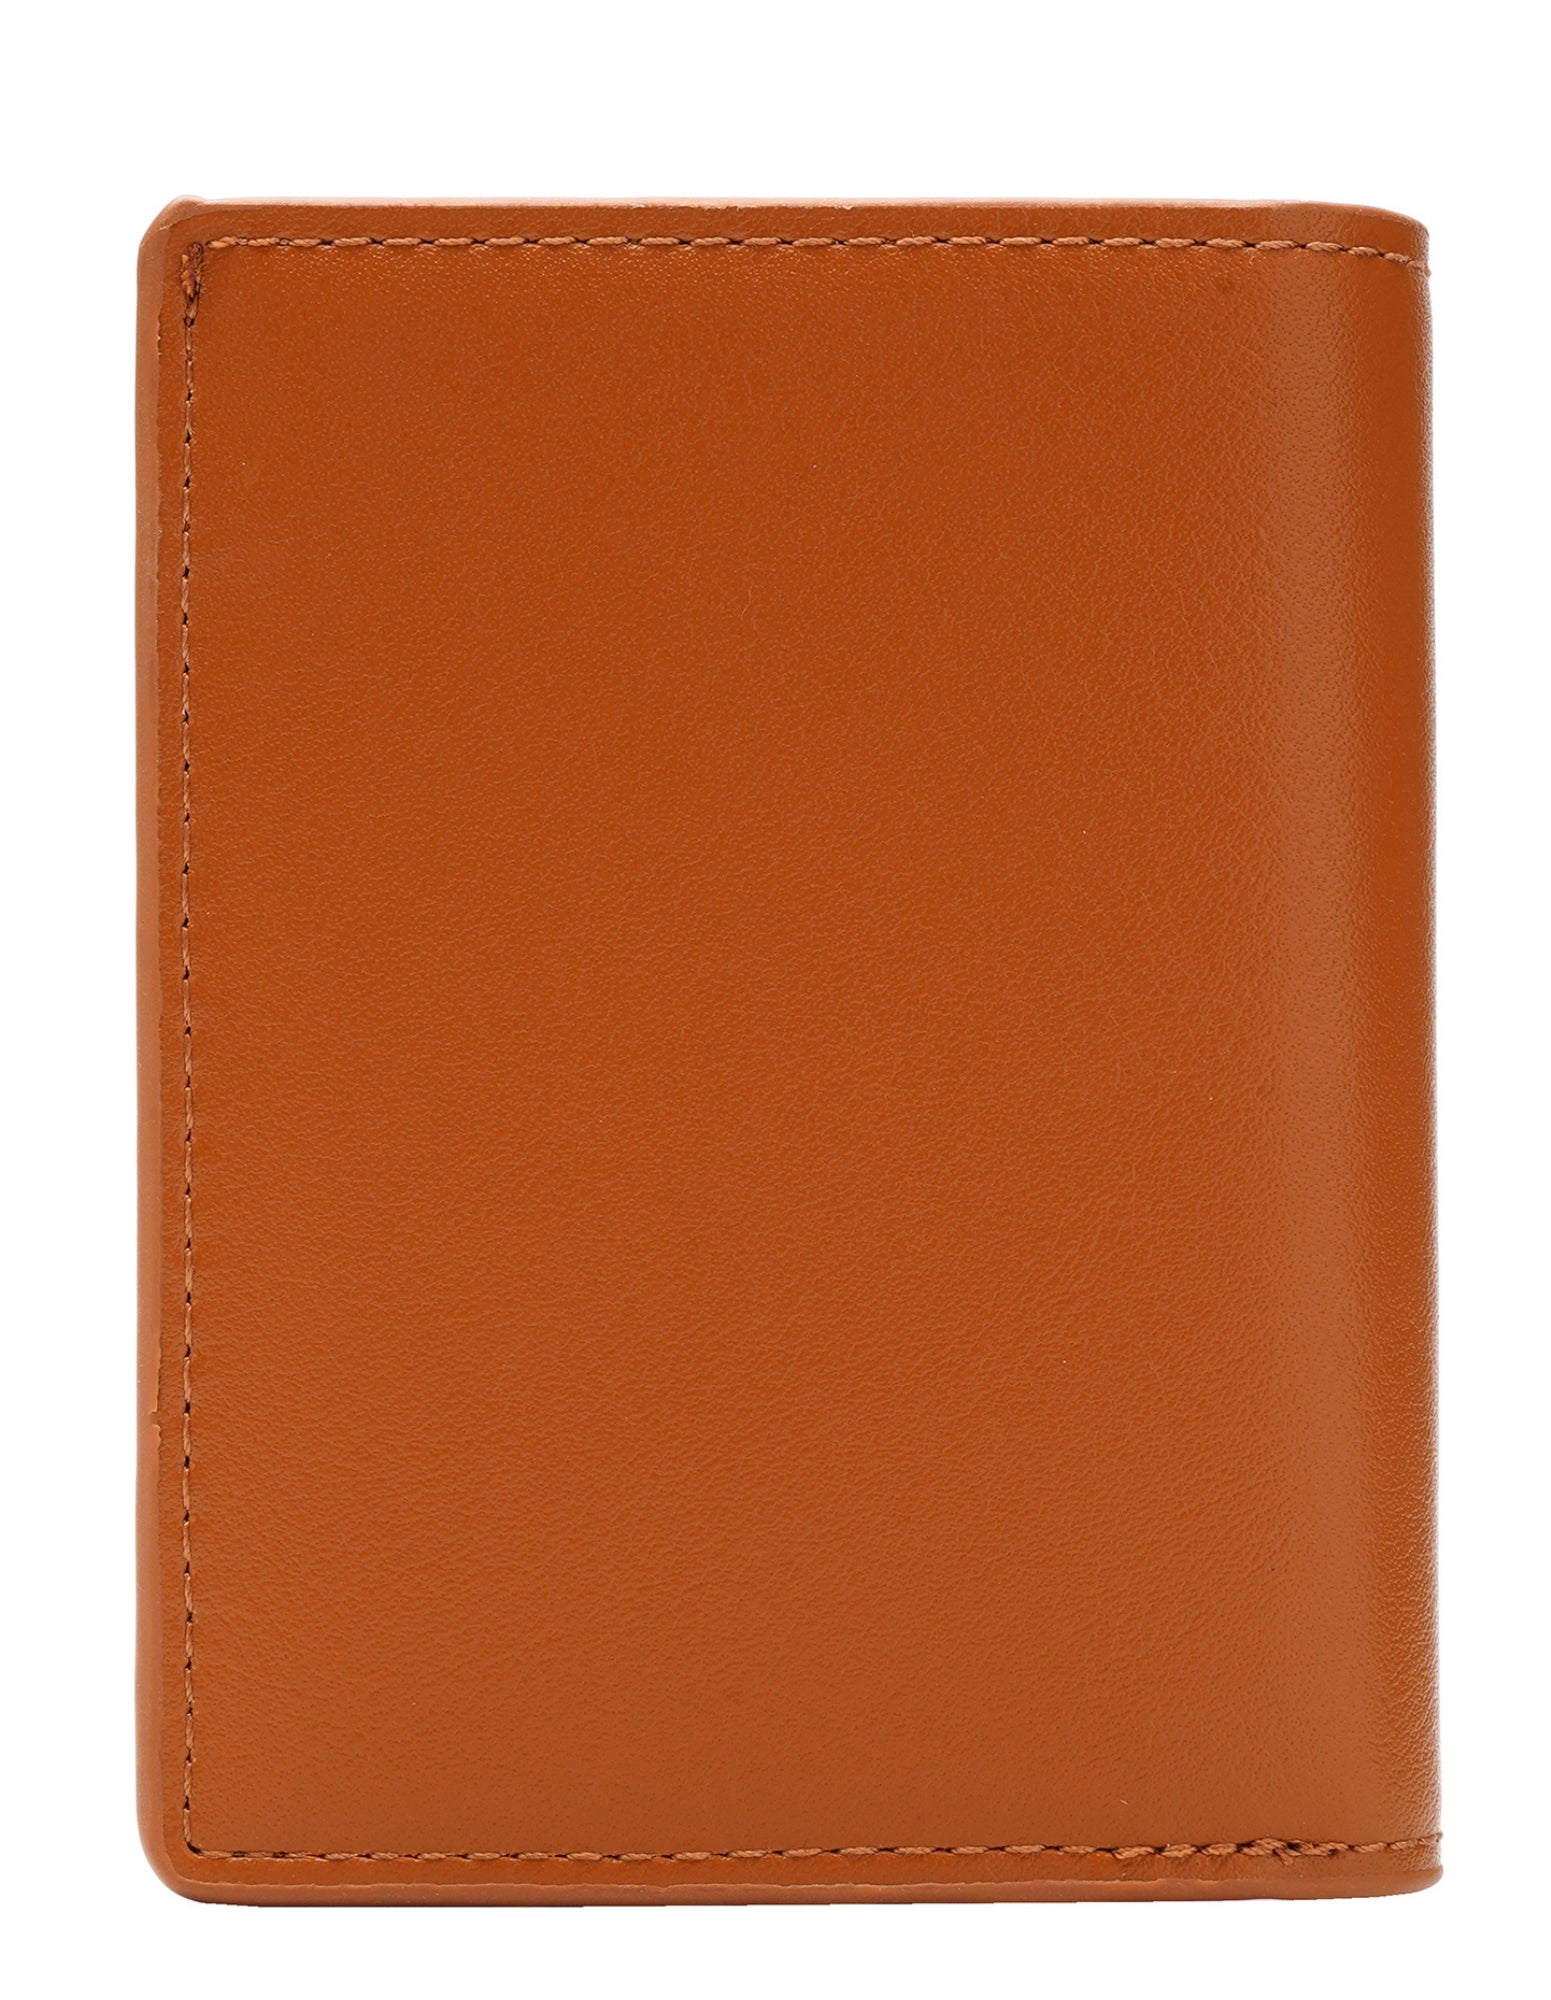 FITZROY AIR TAG TRACKABLE VEGAN LEATHER WALLET - TAN